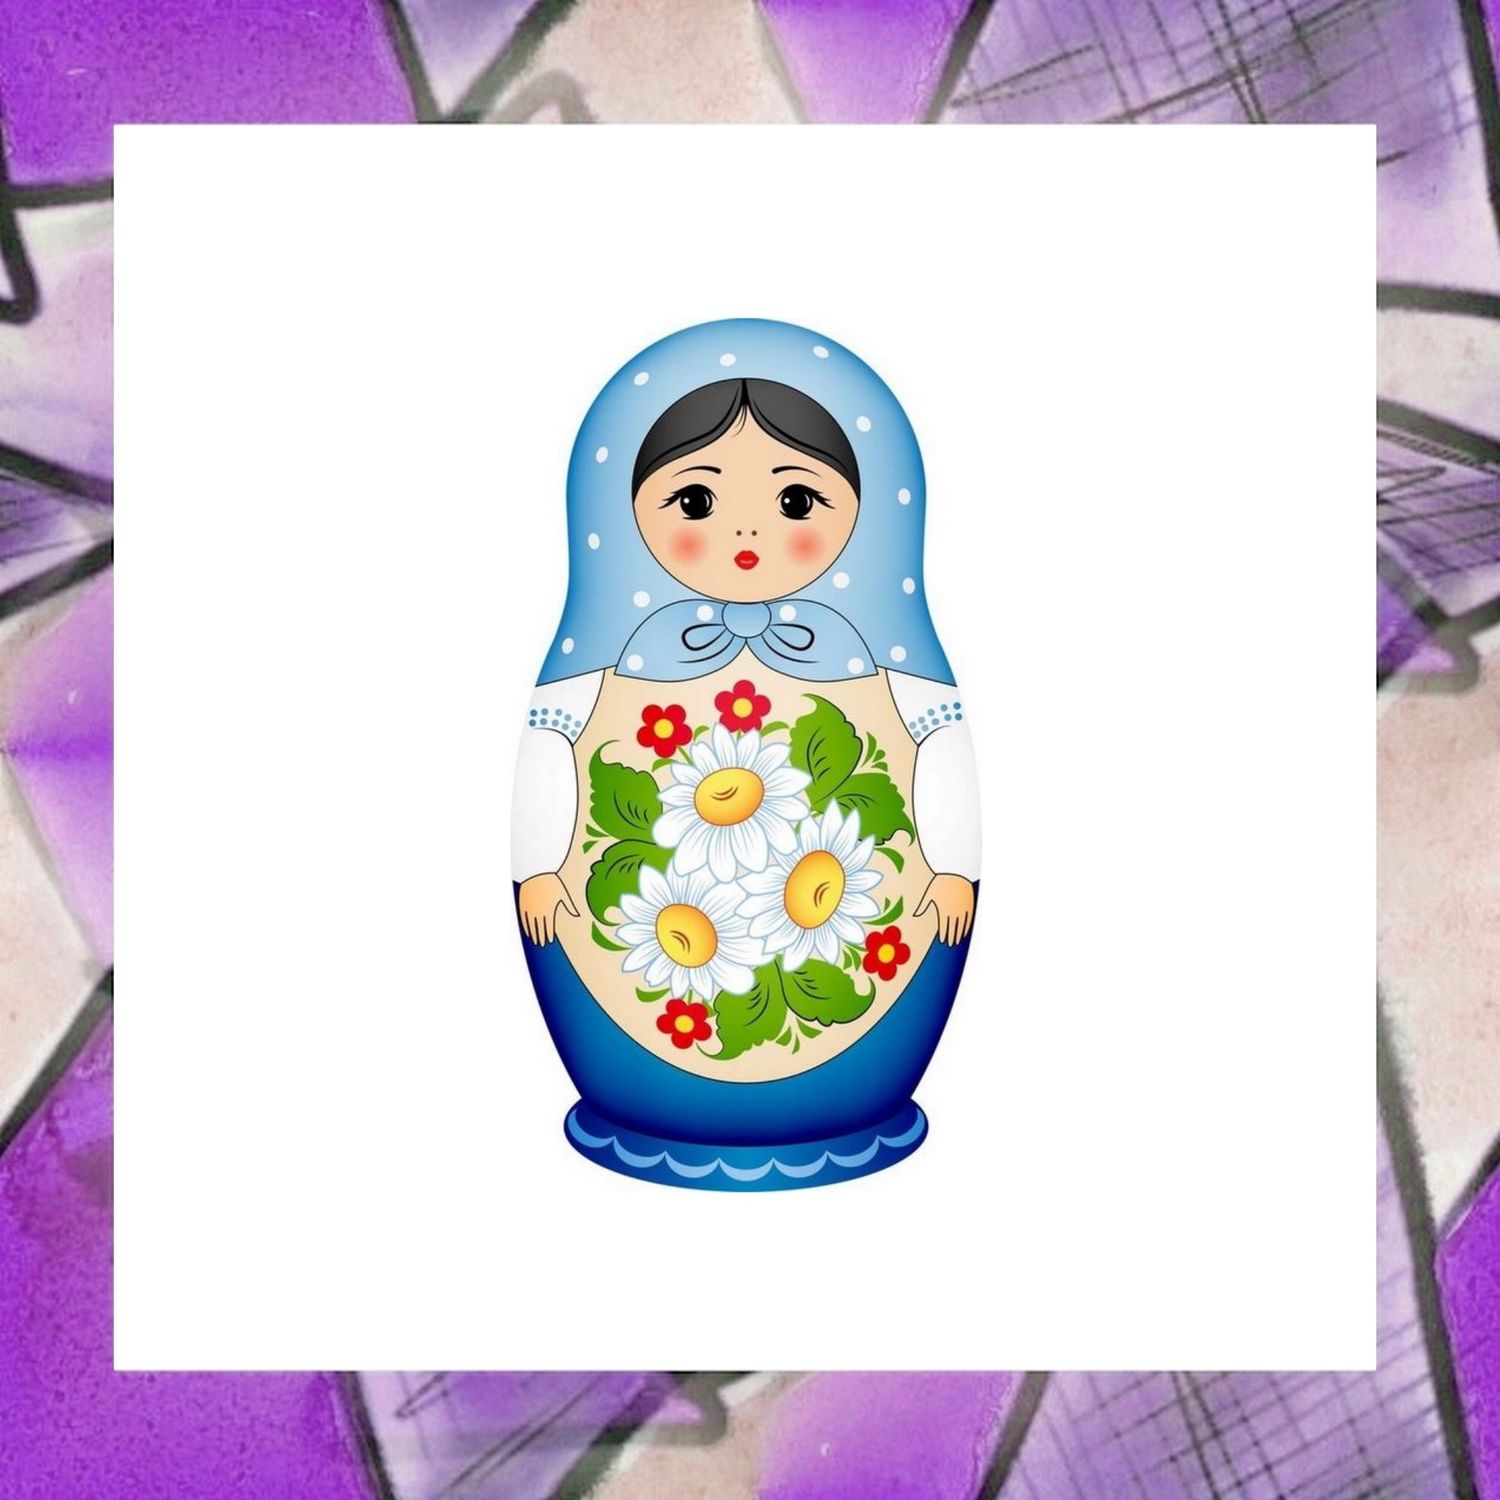 Printed embroidery chart “Matryoshka Dolls” – Owlforest Embroidery